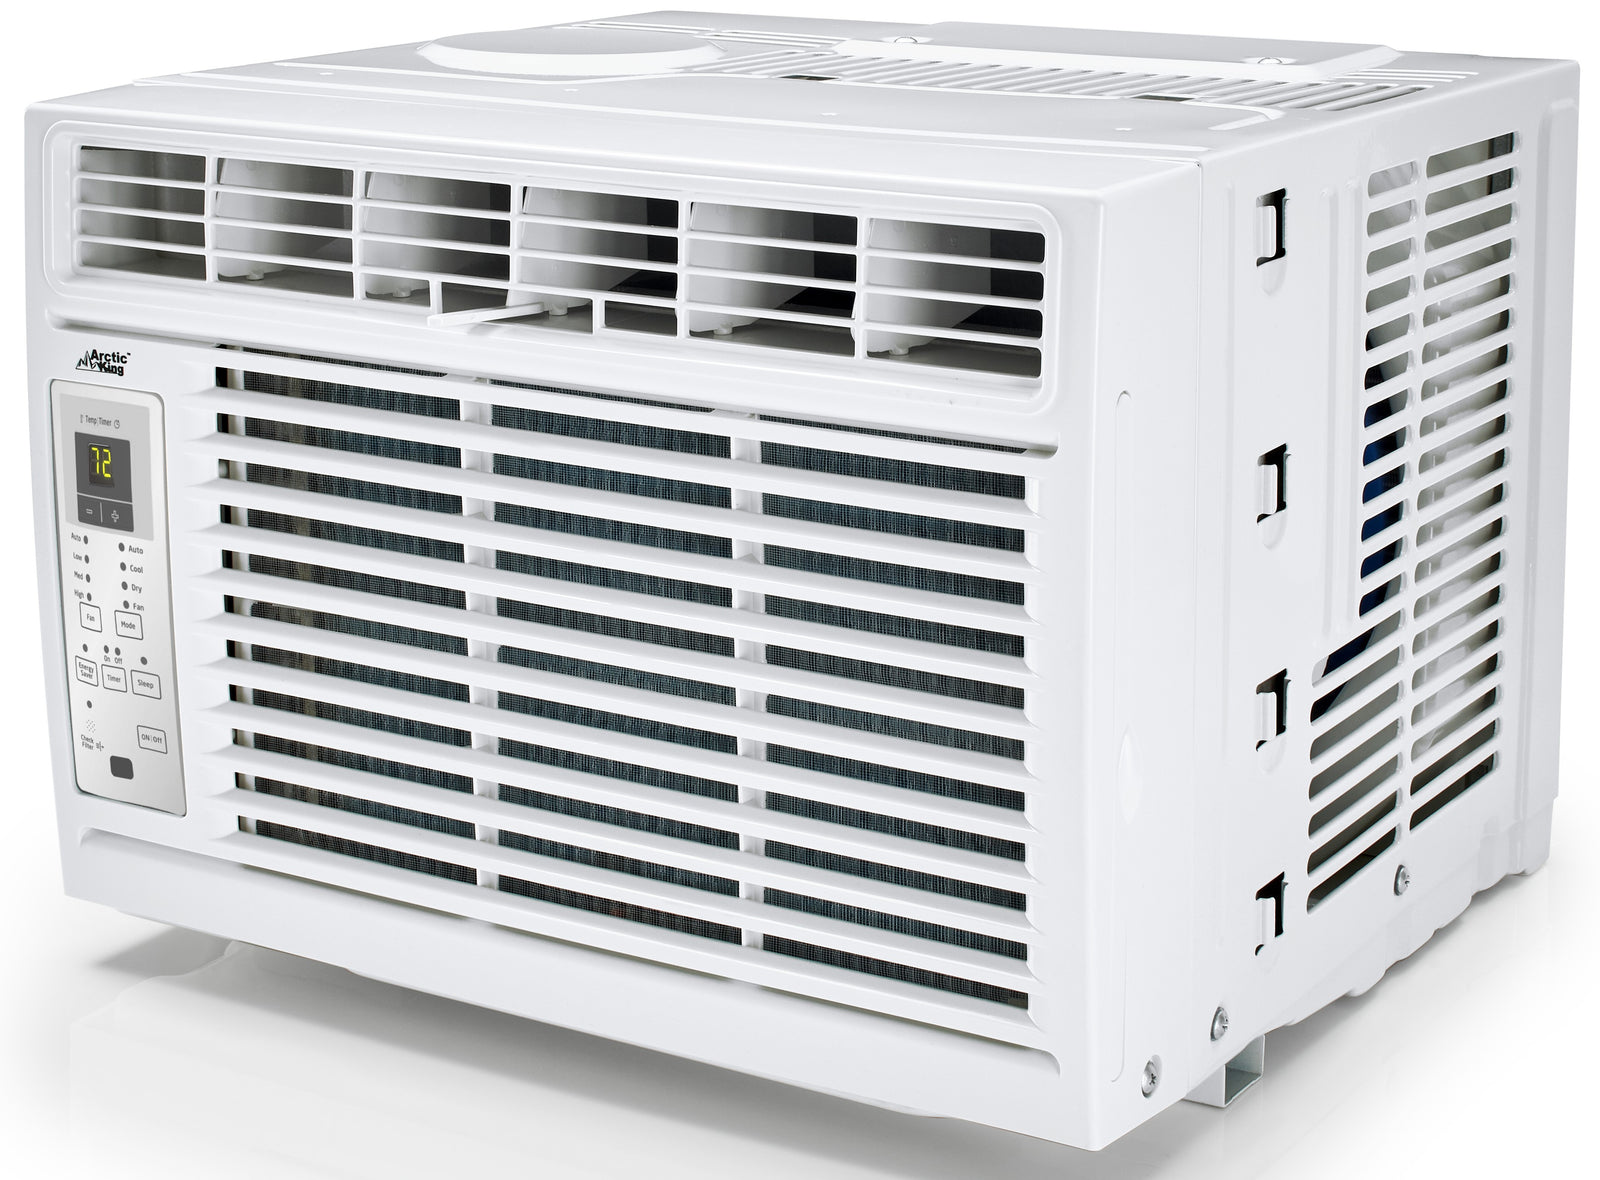 How To Clean An Arctic King Air Conditioner